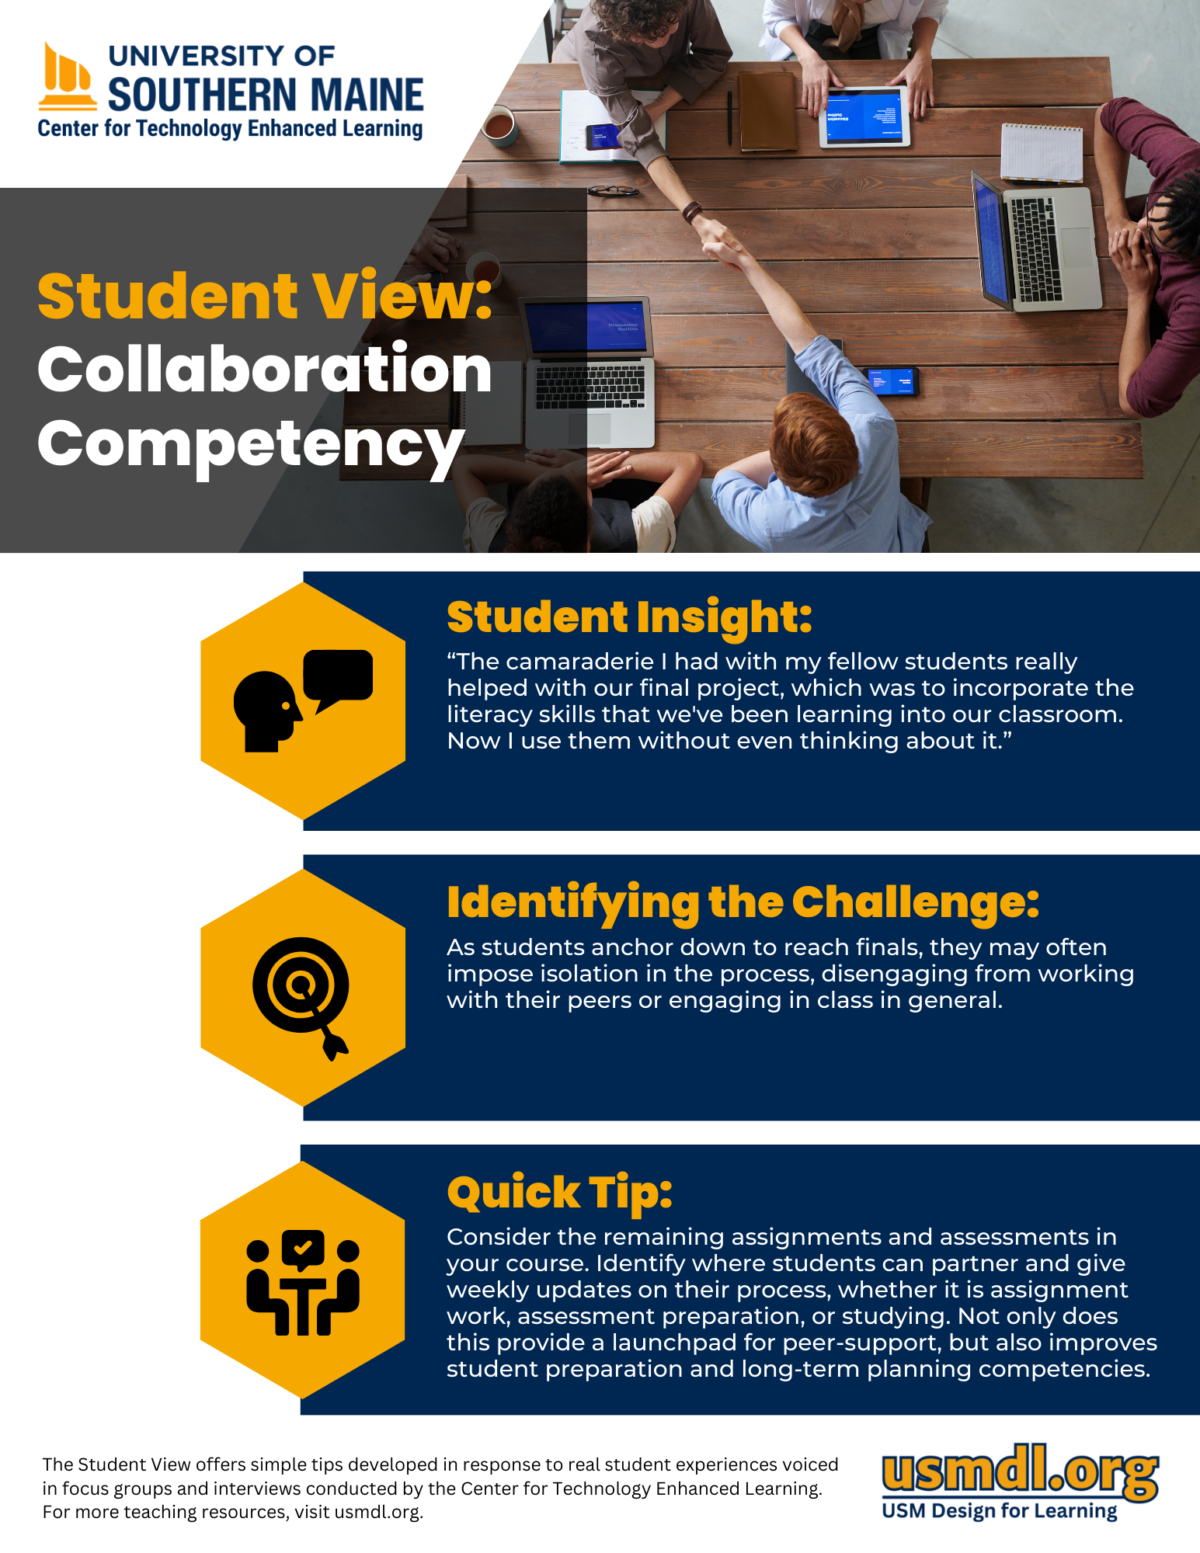 Collaboration Competency Infographic. All information in text following.